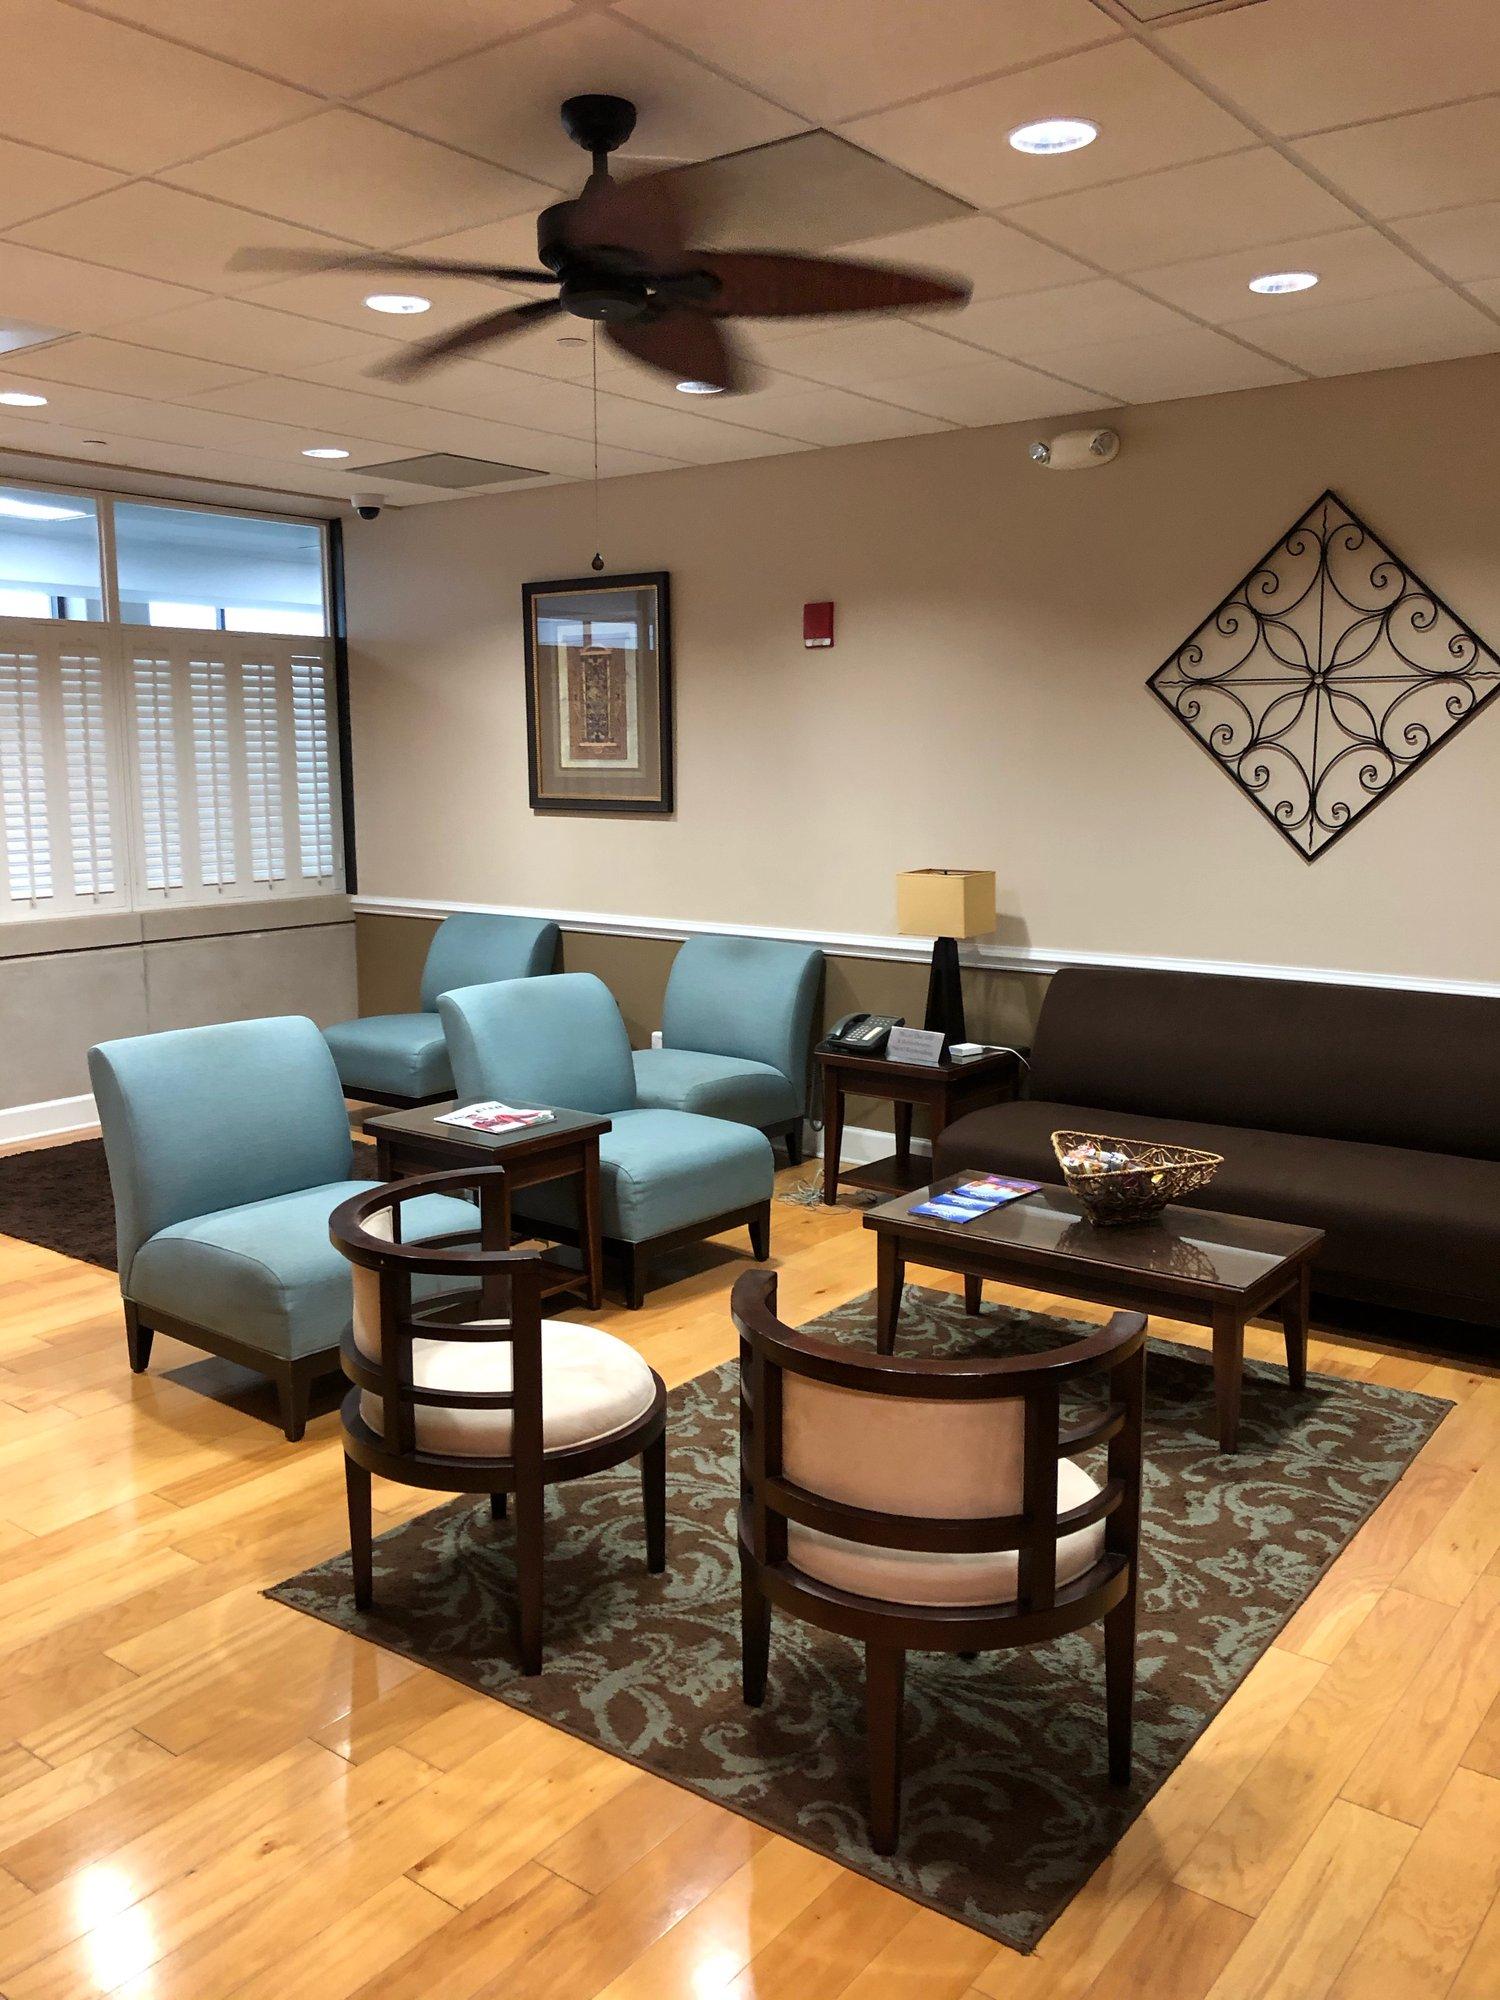 Mobile Airport Authority Executive Lounge image 3 of 5